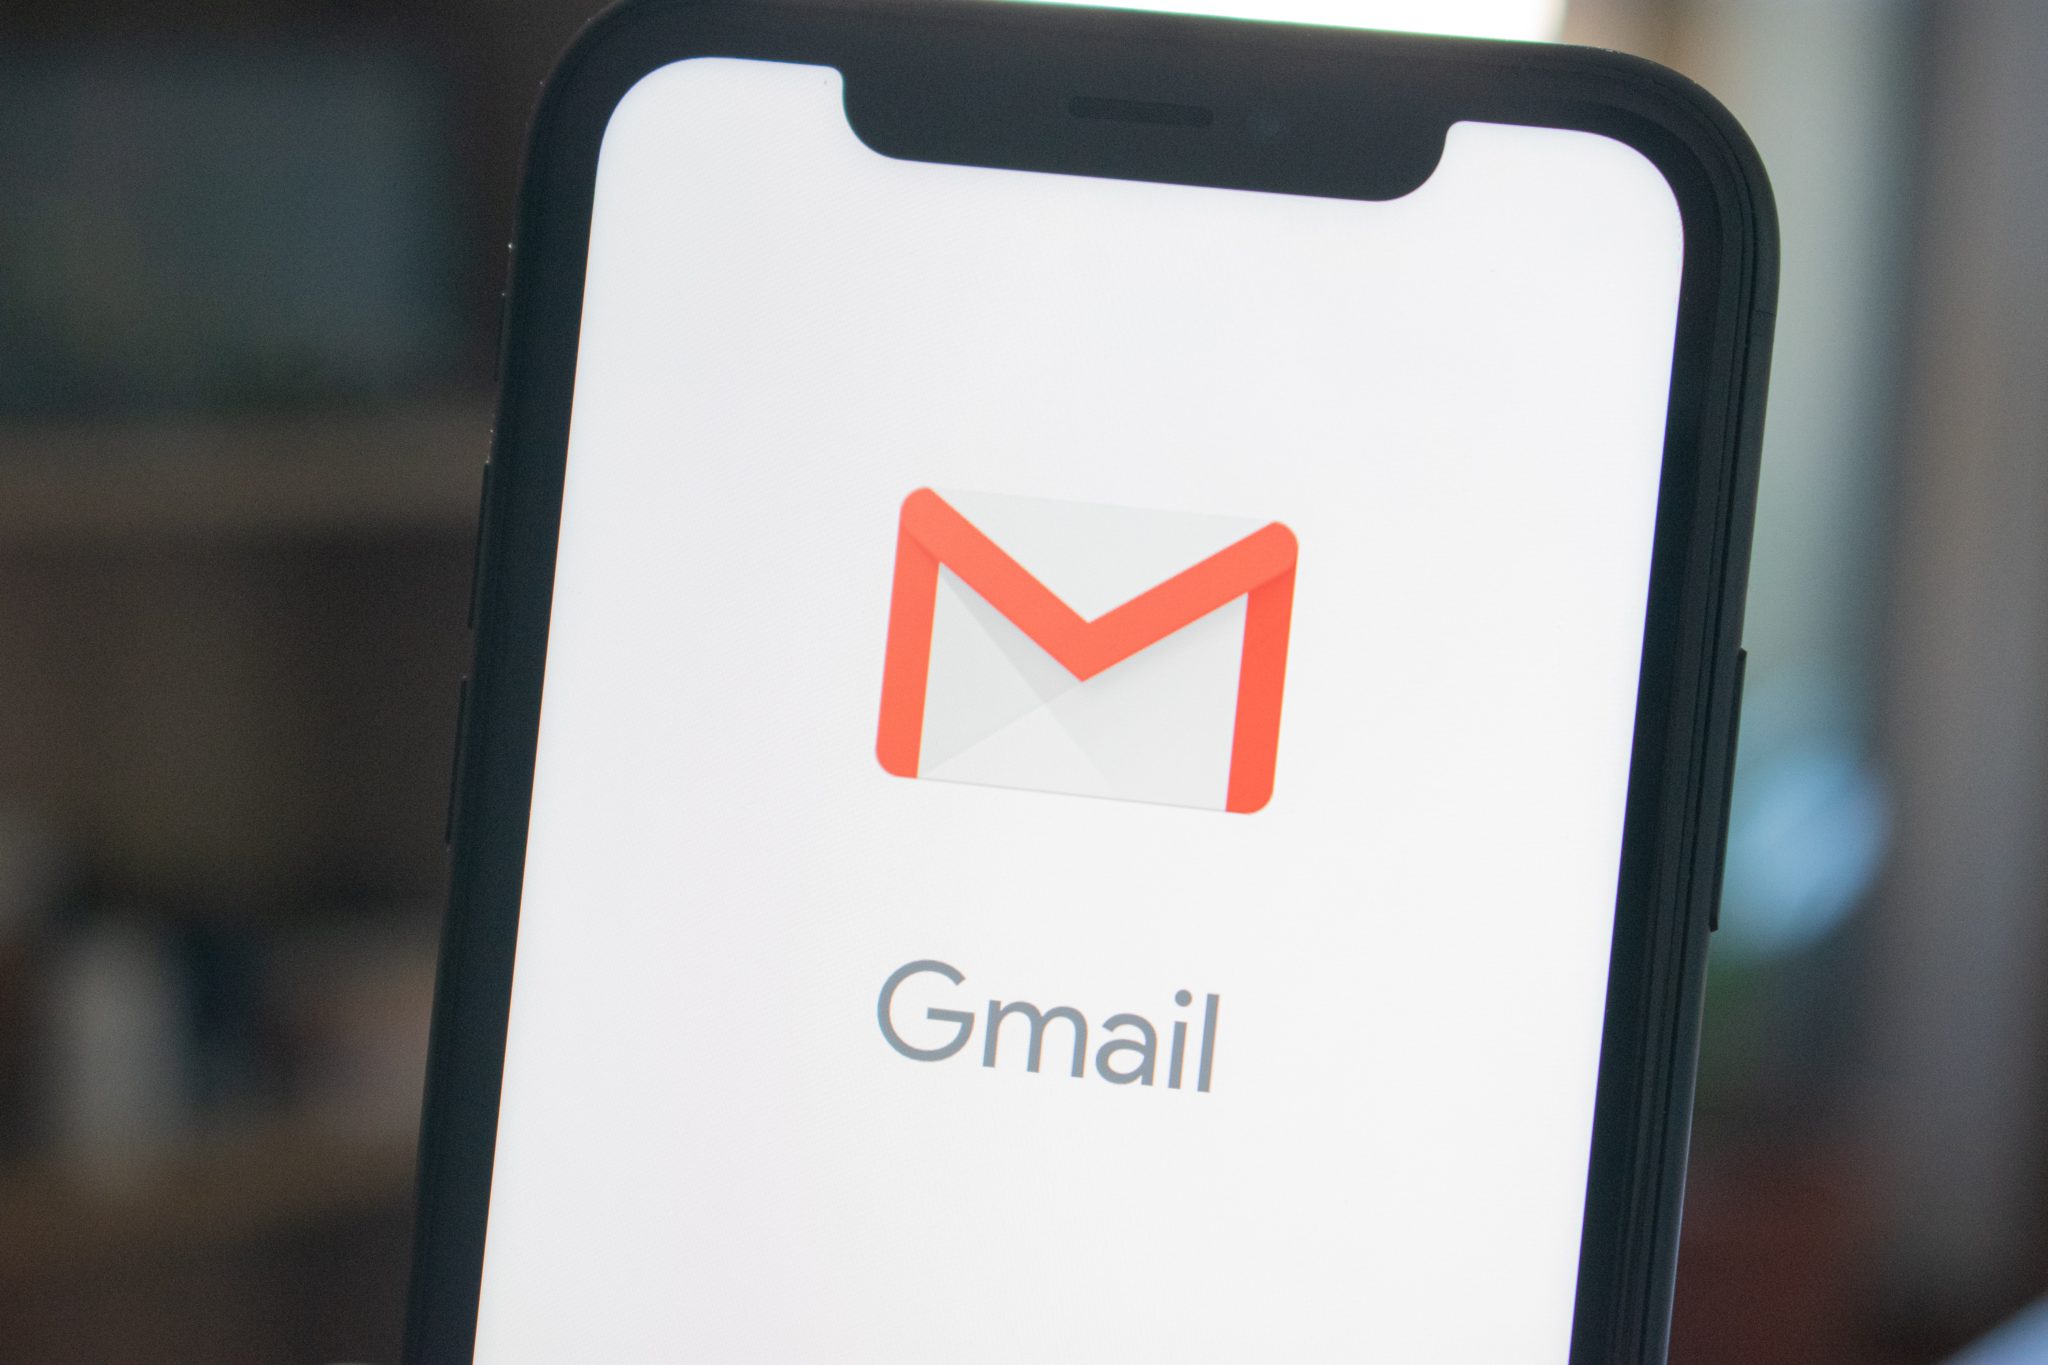 A phone showing the Gmail app open on it